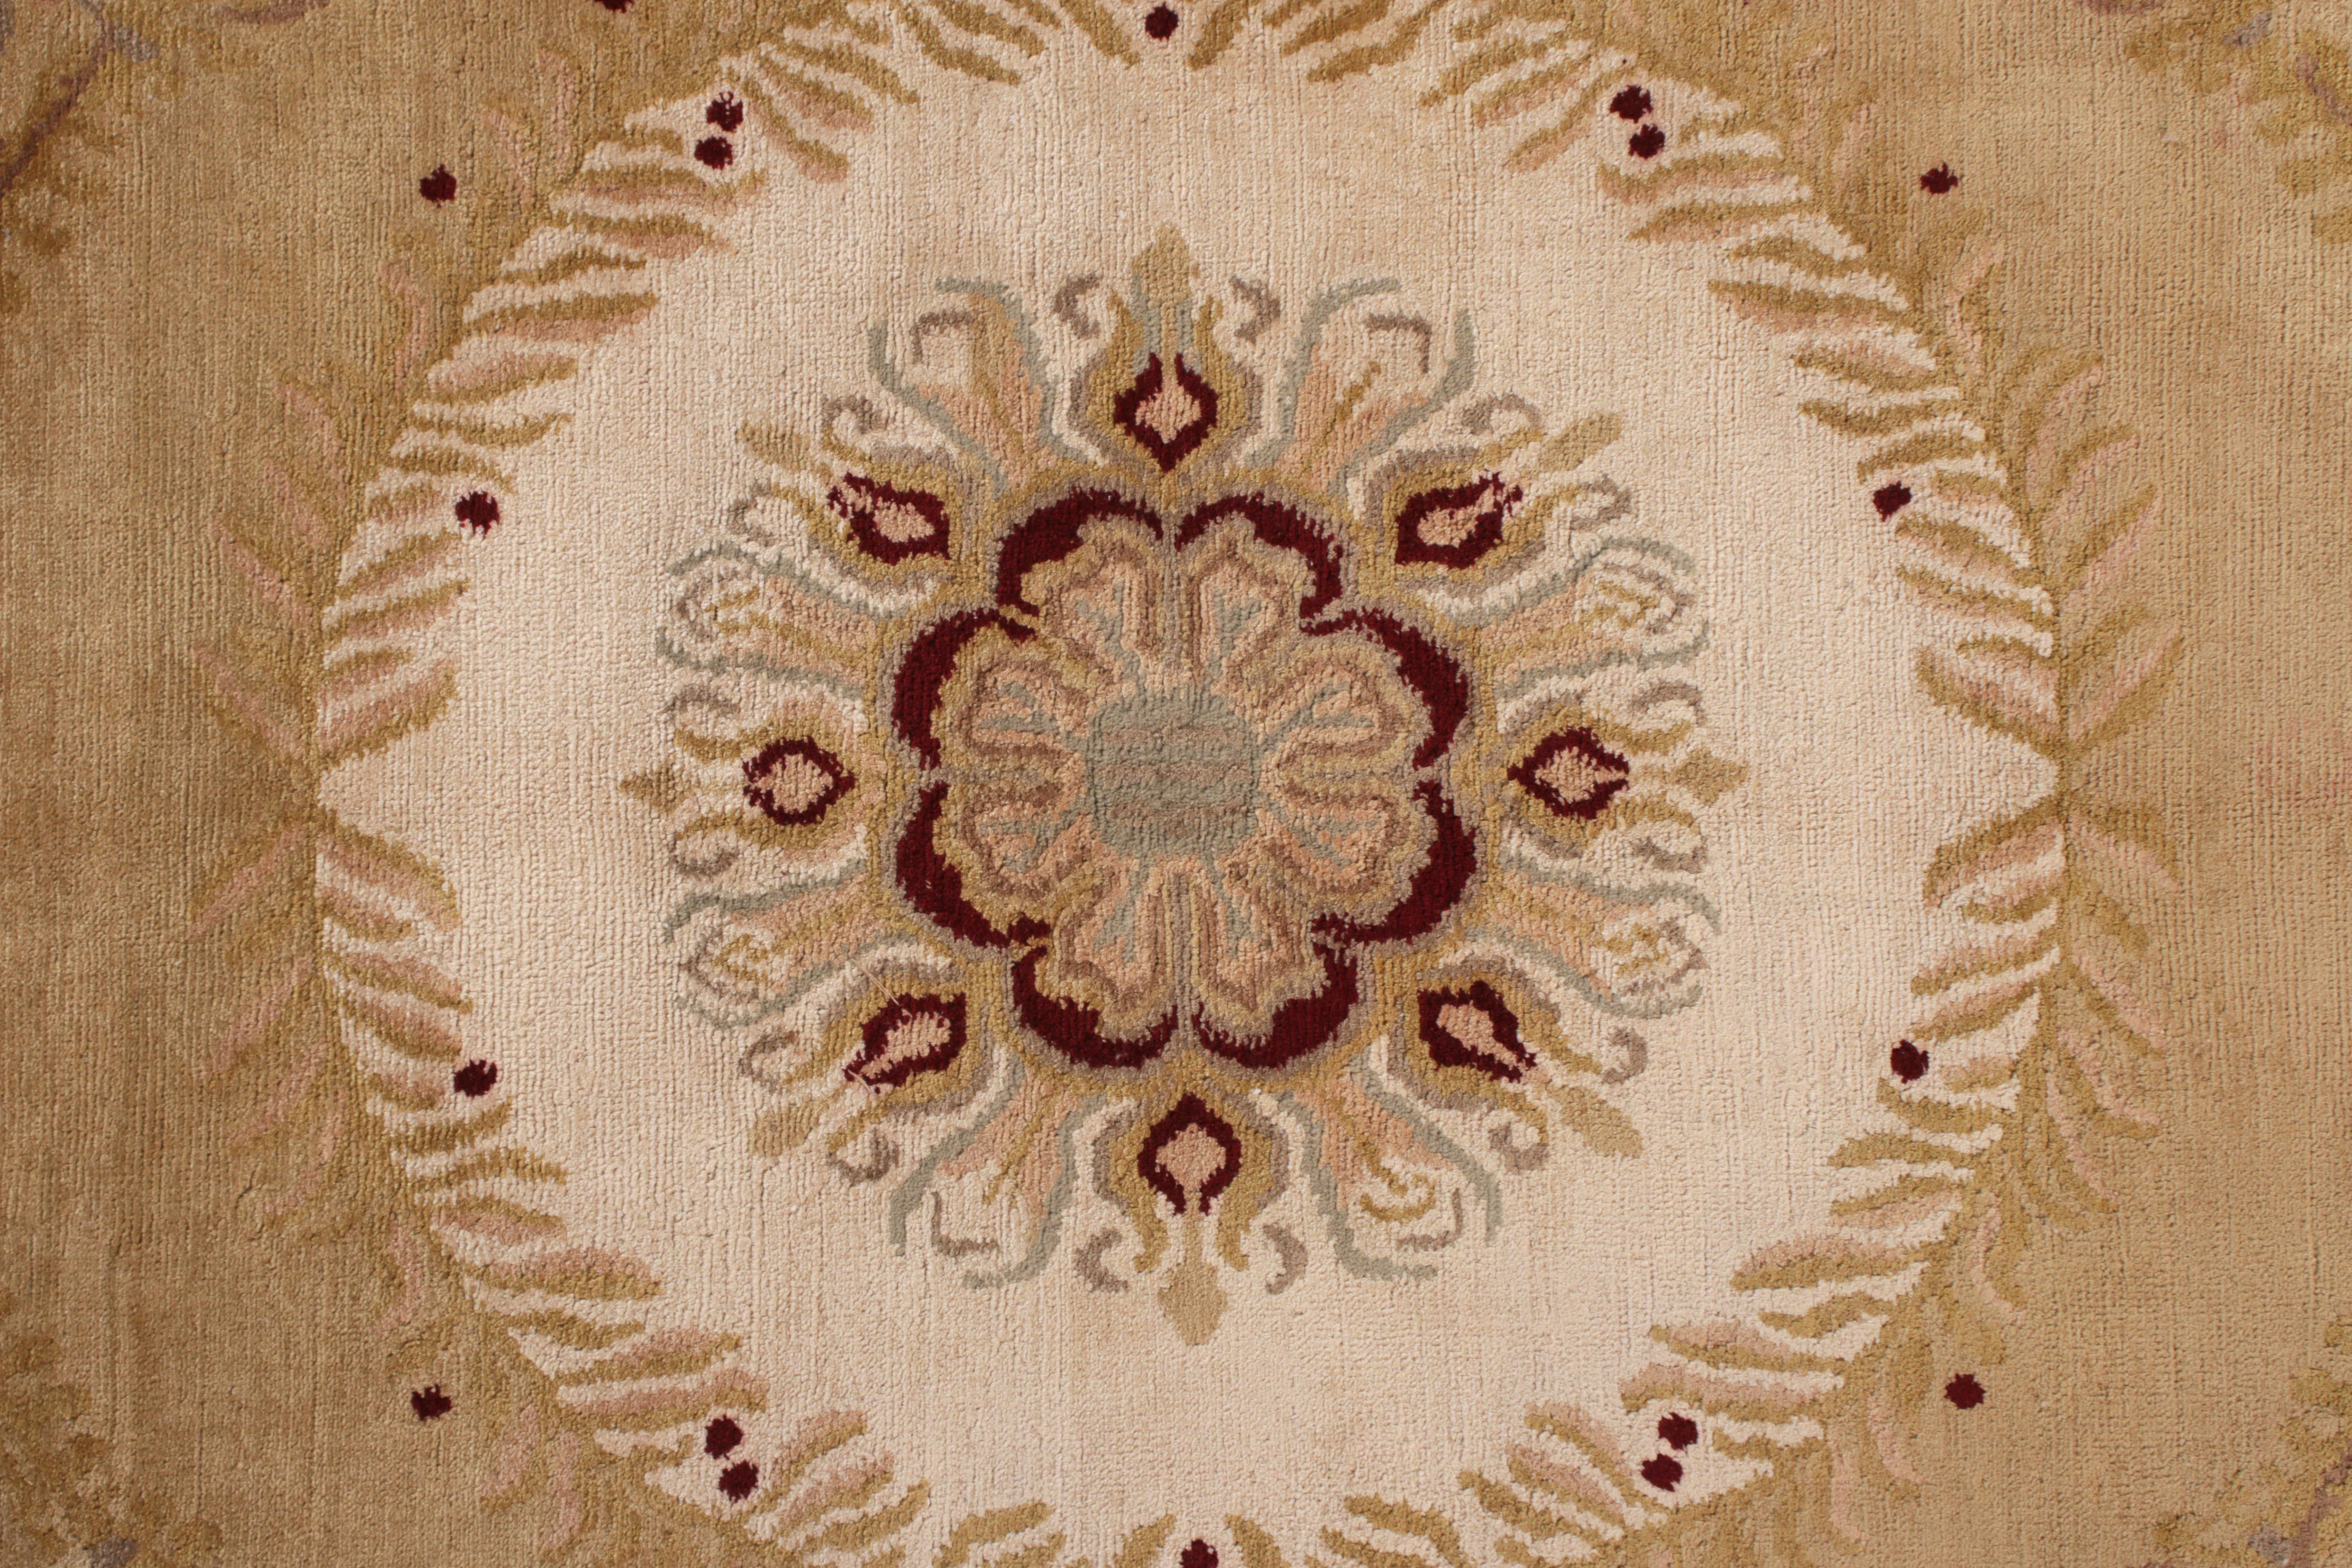 Hand-Knotted Rug & Kilim's Hand Knotted Aubusson Style Rug in Beige-Brown Medallion Pattern